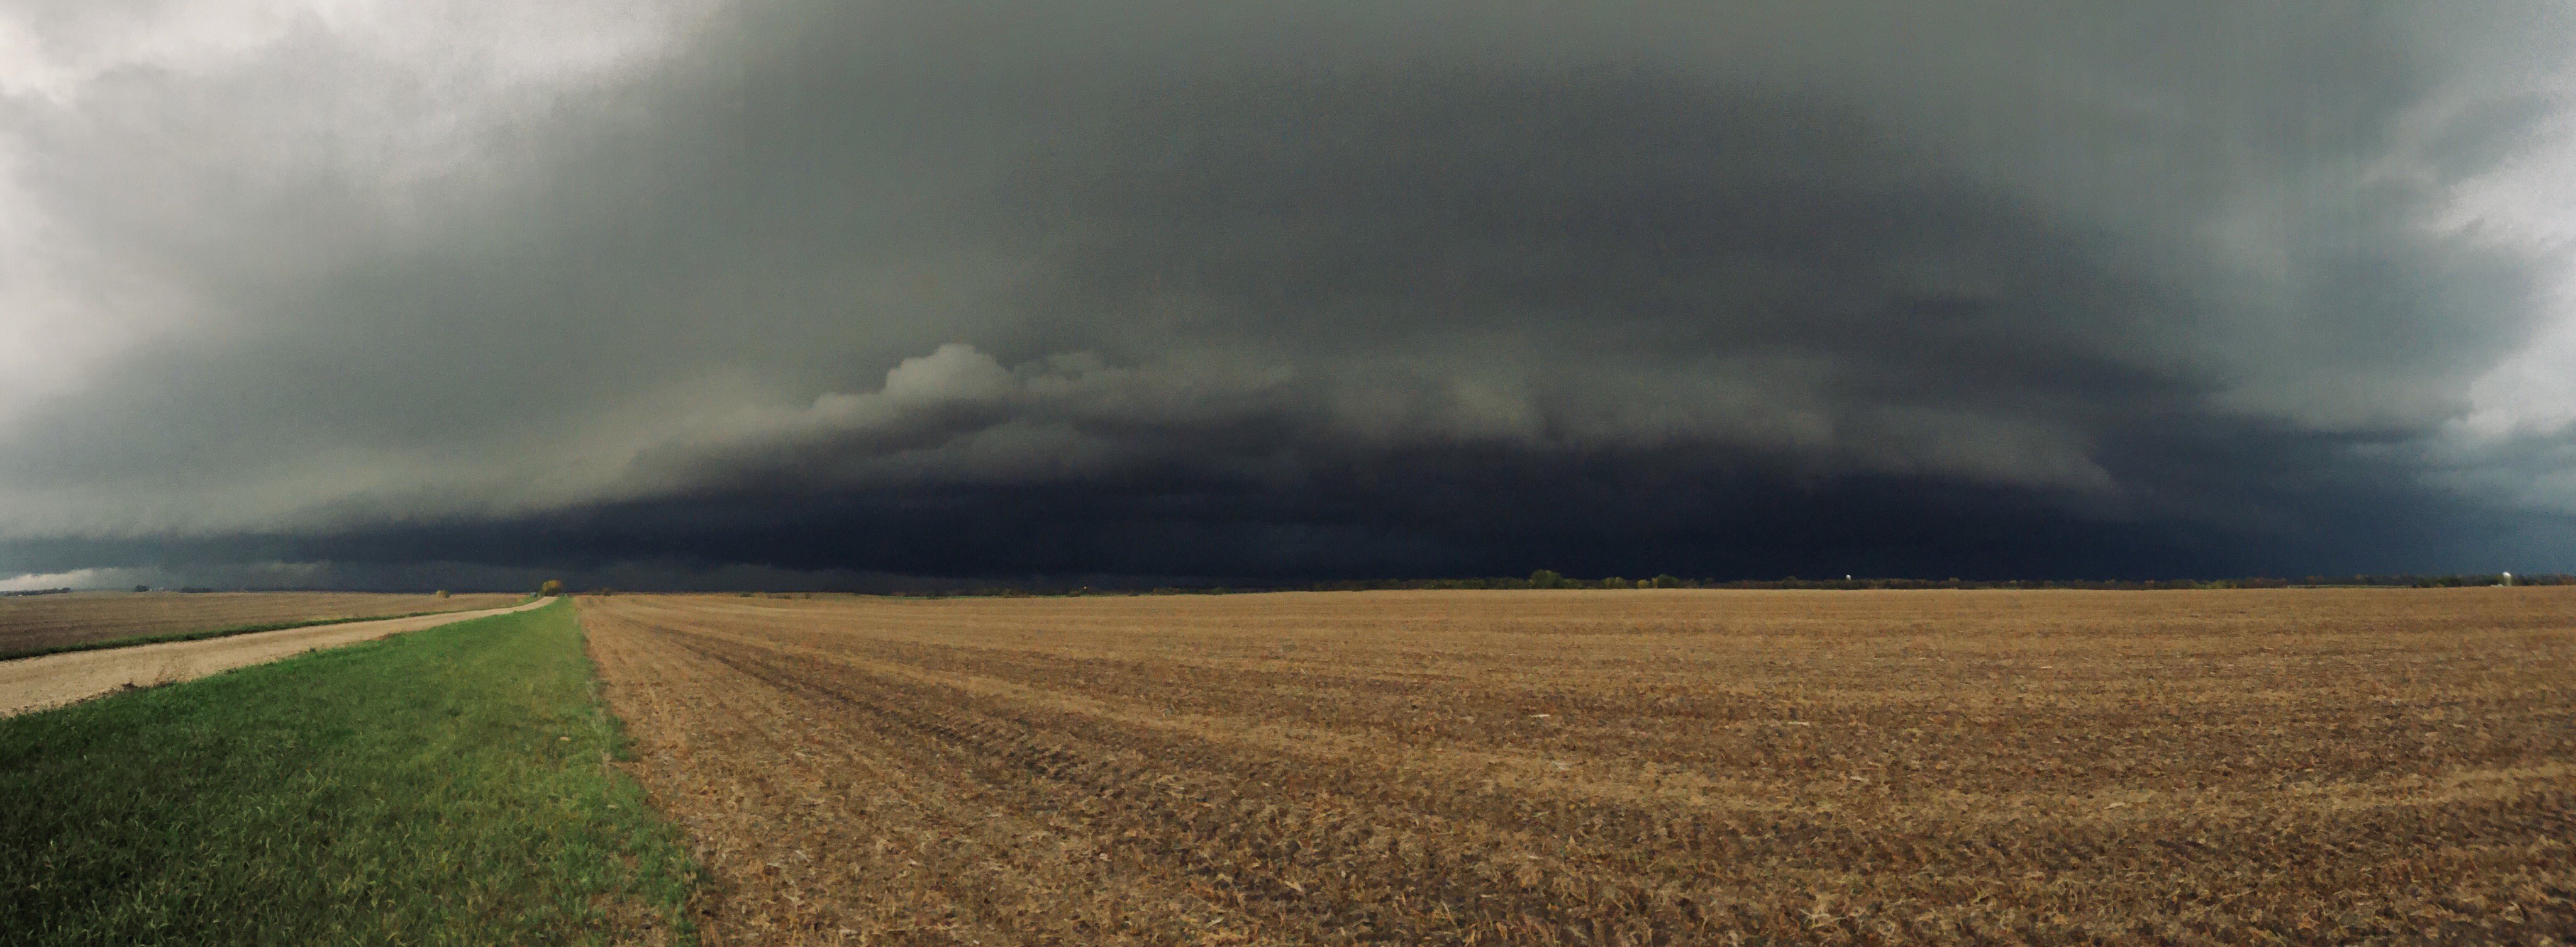 Storm approaching Castlewood, SD on October 9, 2021 (Photo by Derek Thompson)